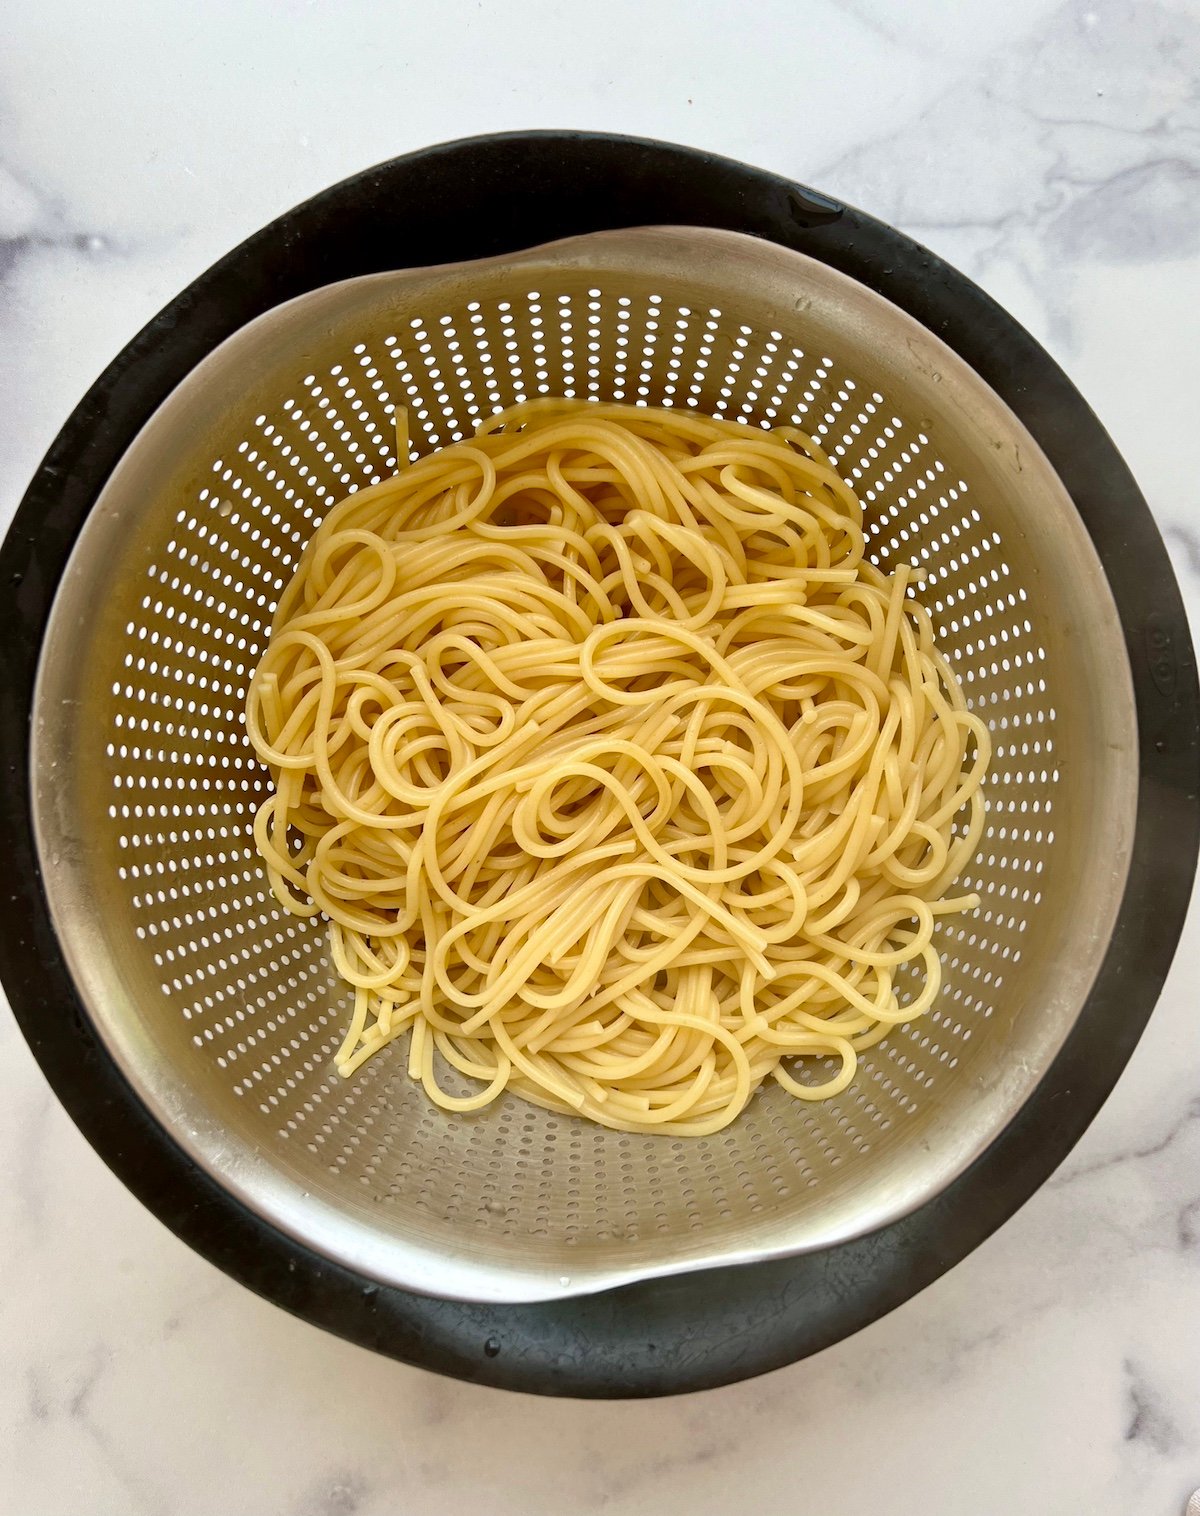 Cooked spaghetti noodles in strainer.